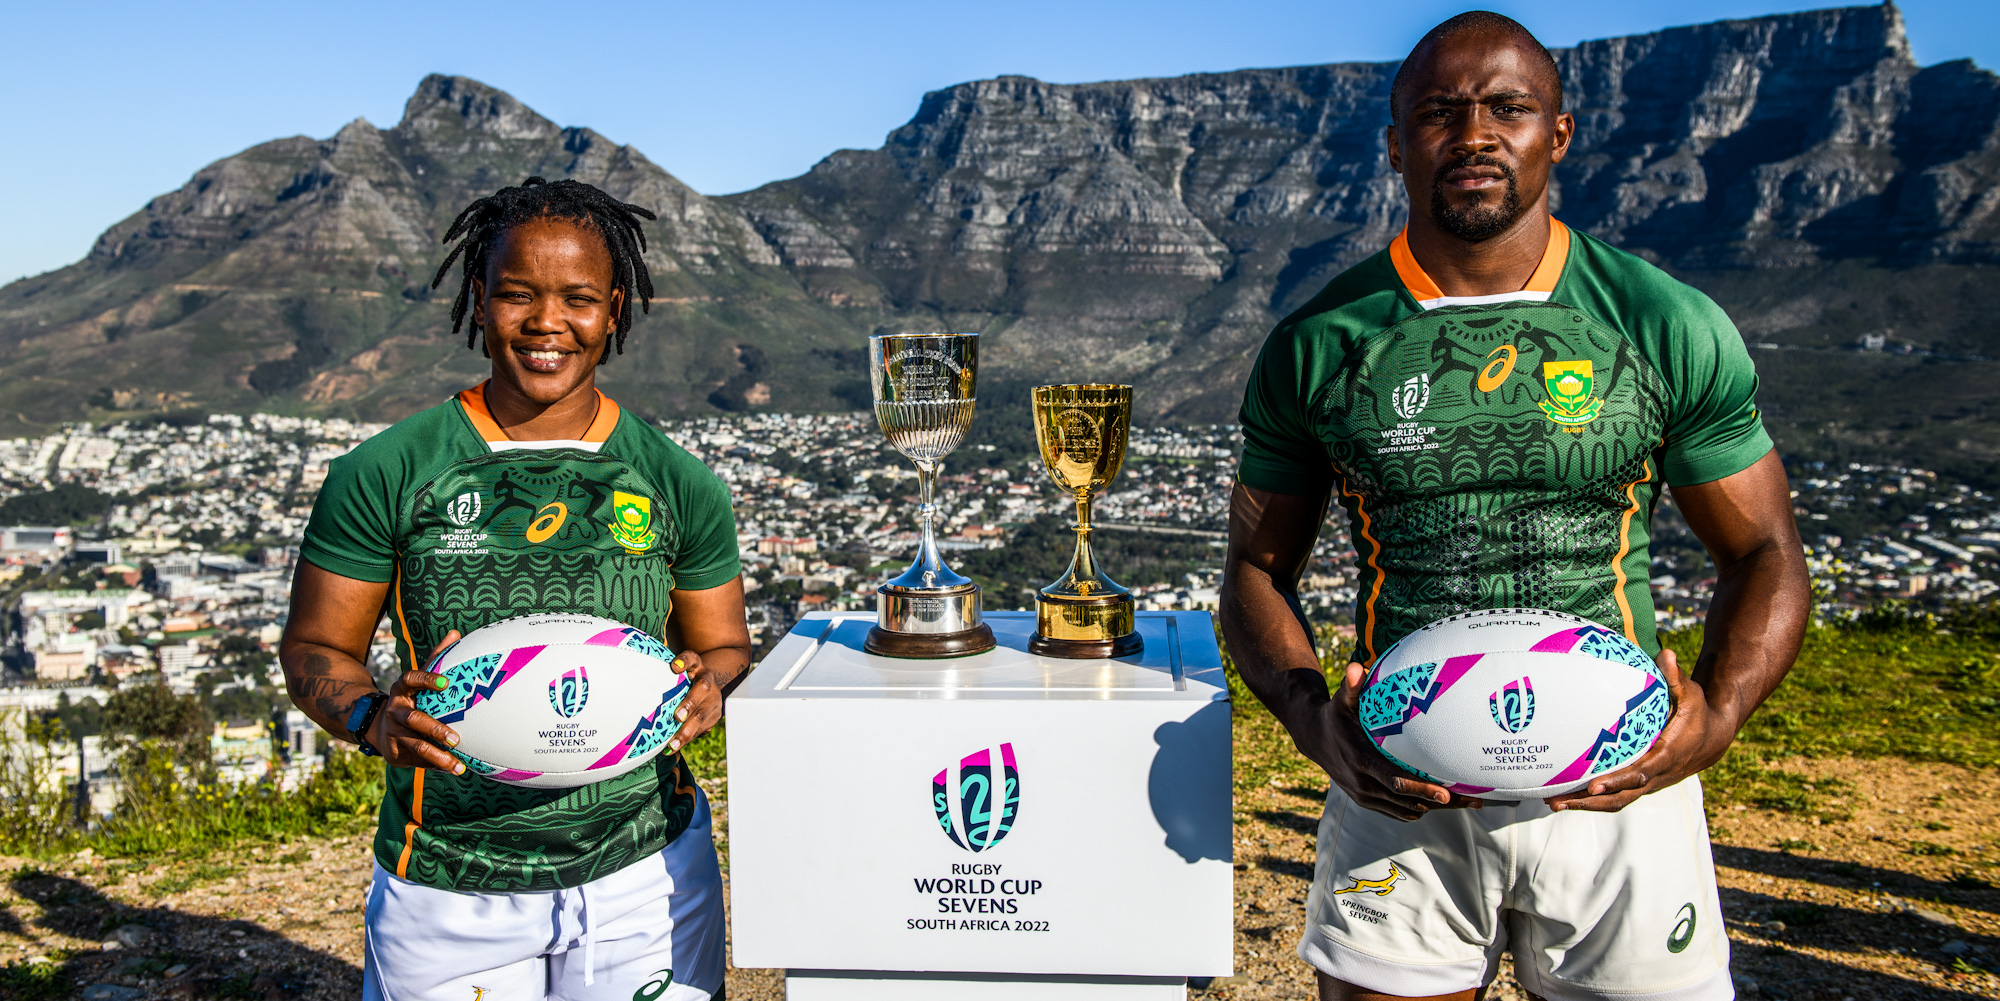 Sizophila Solontsi and Siviwe Soyizwapi will lead the two South African teams in action this weekend.